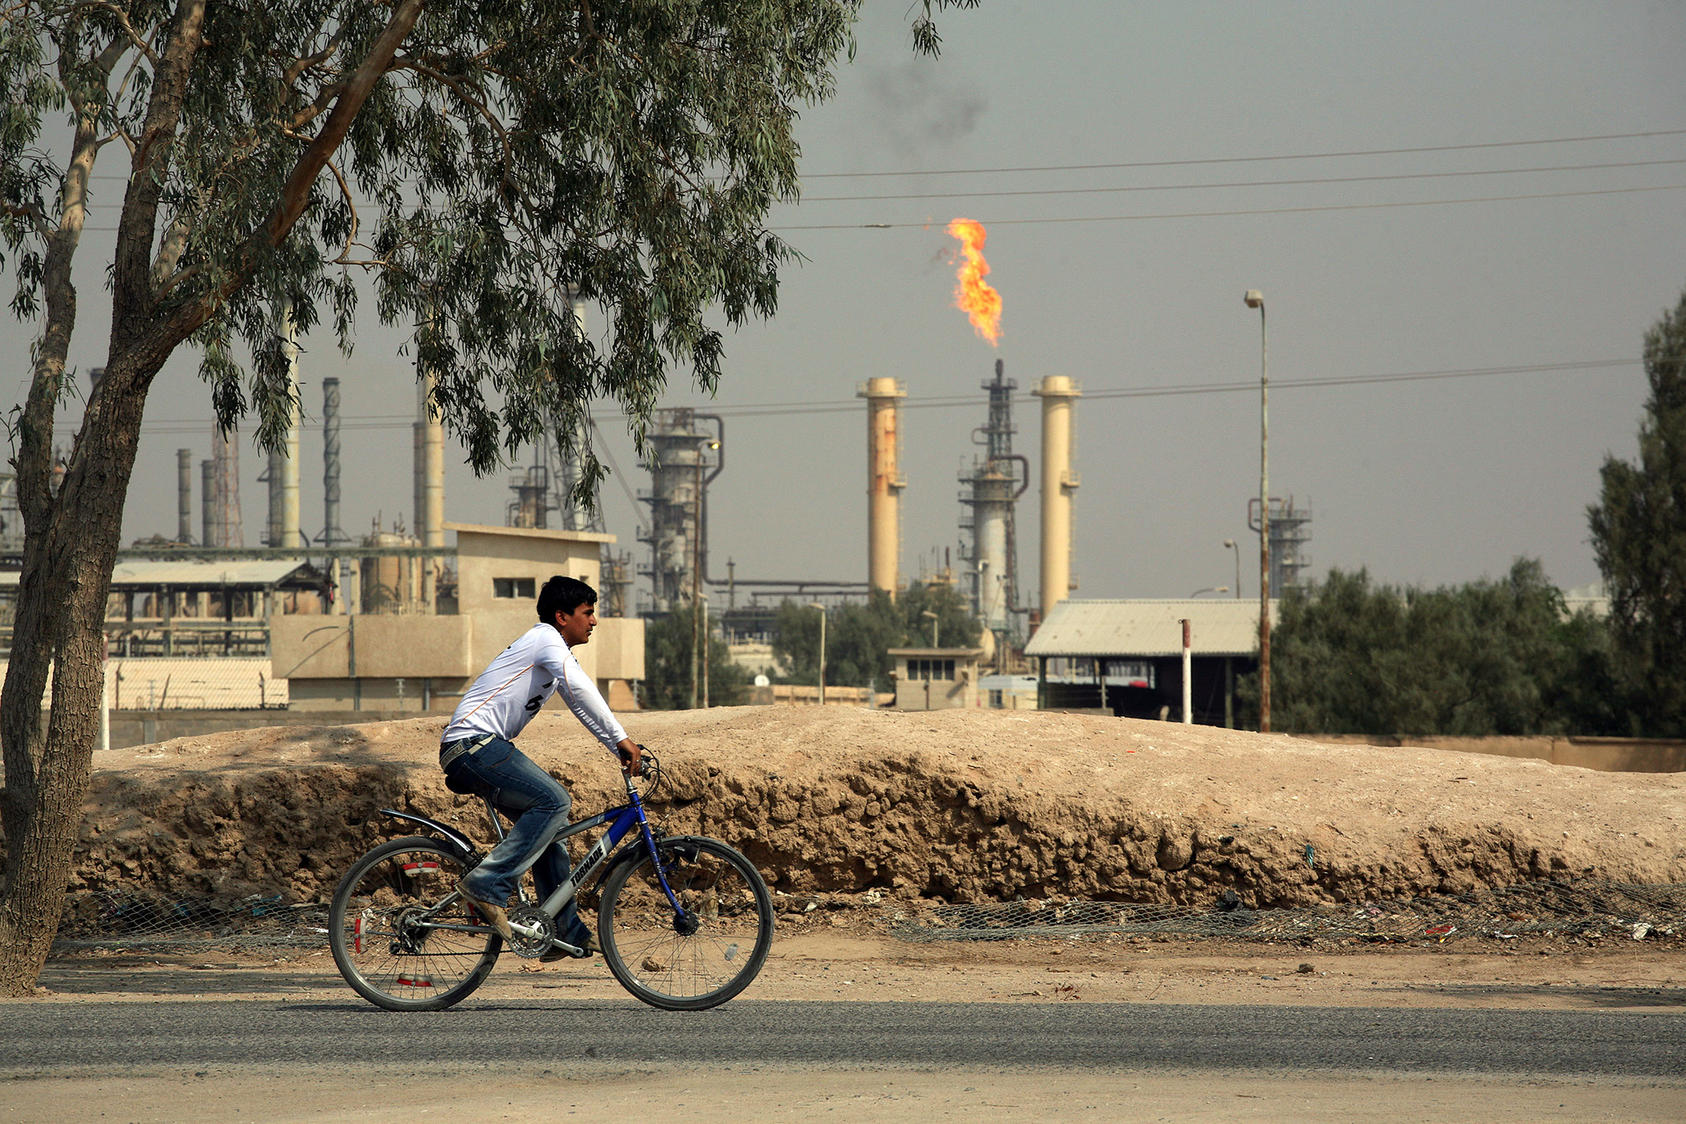 A bicyclist rides past a refinery near Basra, Iraq, on Oct. 27, 2009. (Joao Silva/The New York Times)